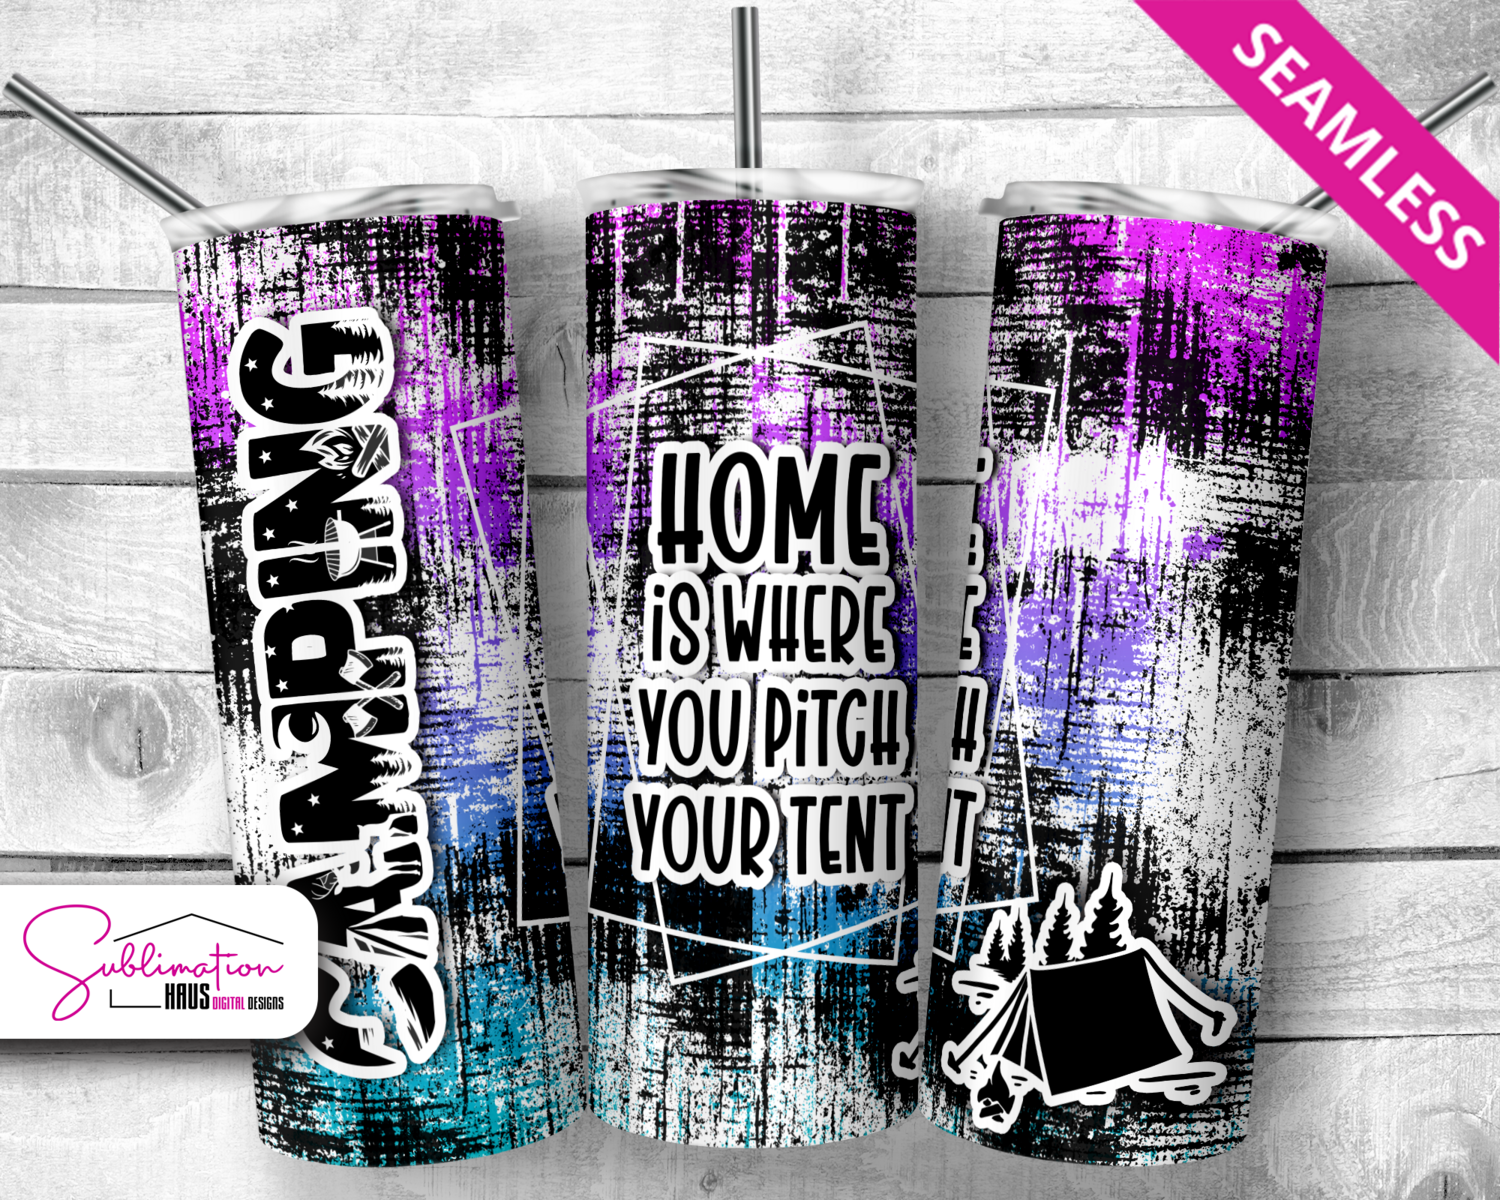 Home is where you pitch your tent - 20oz tumbler